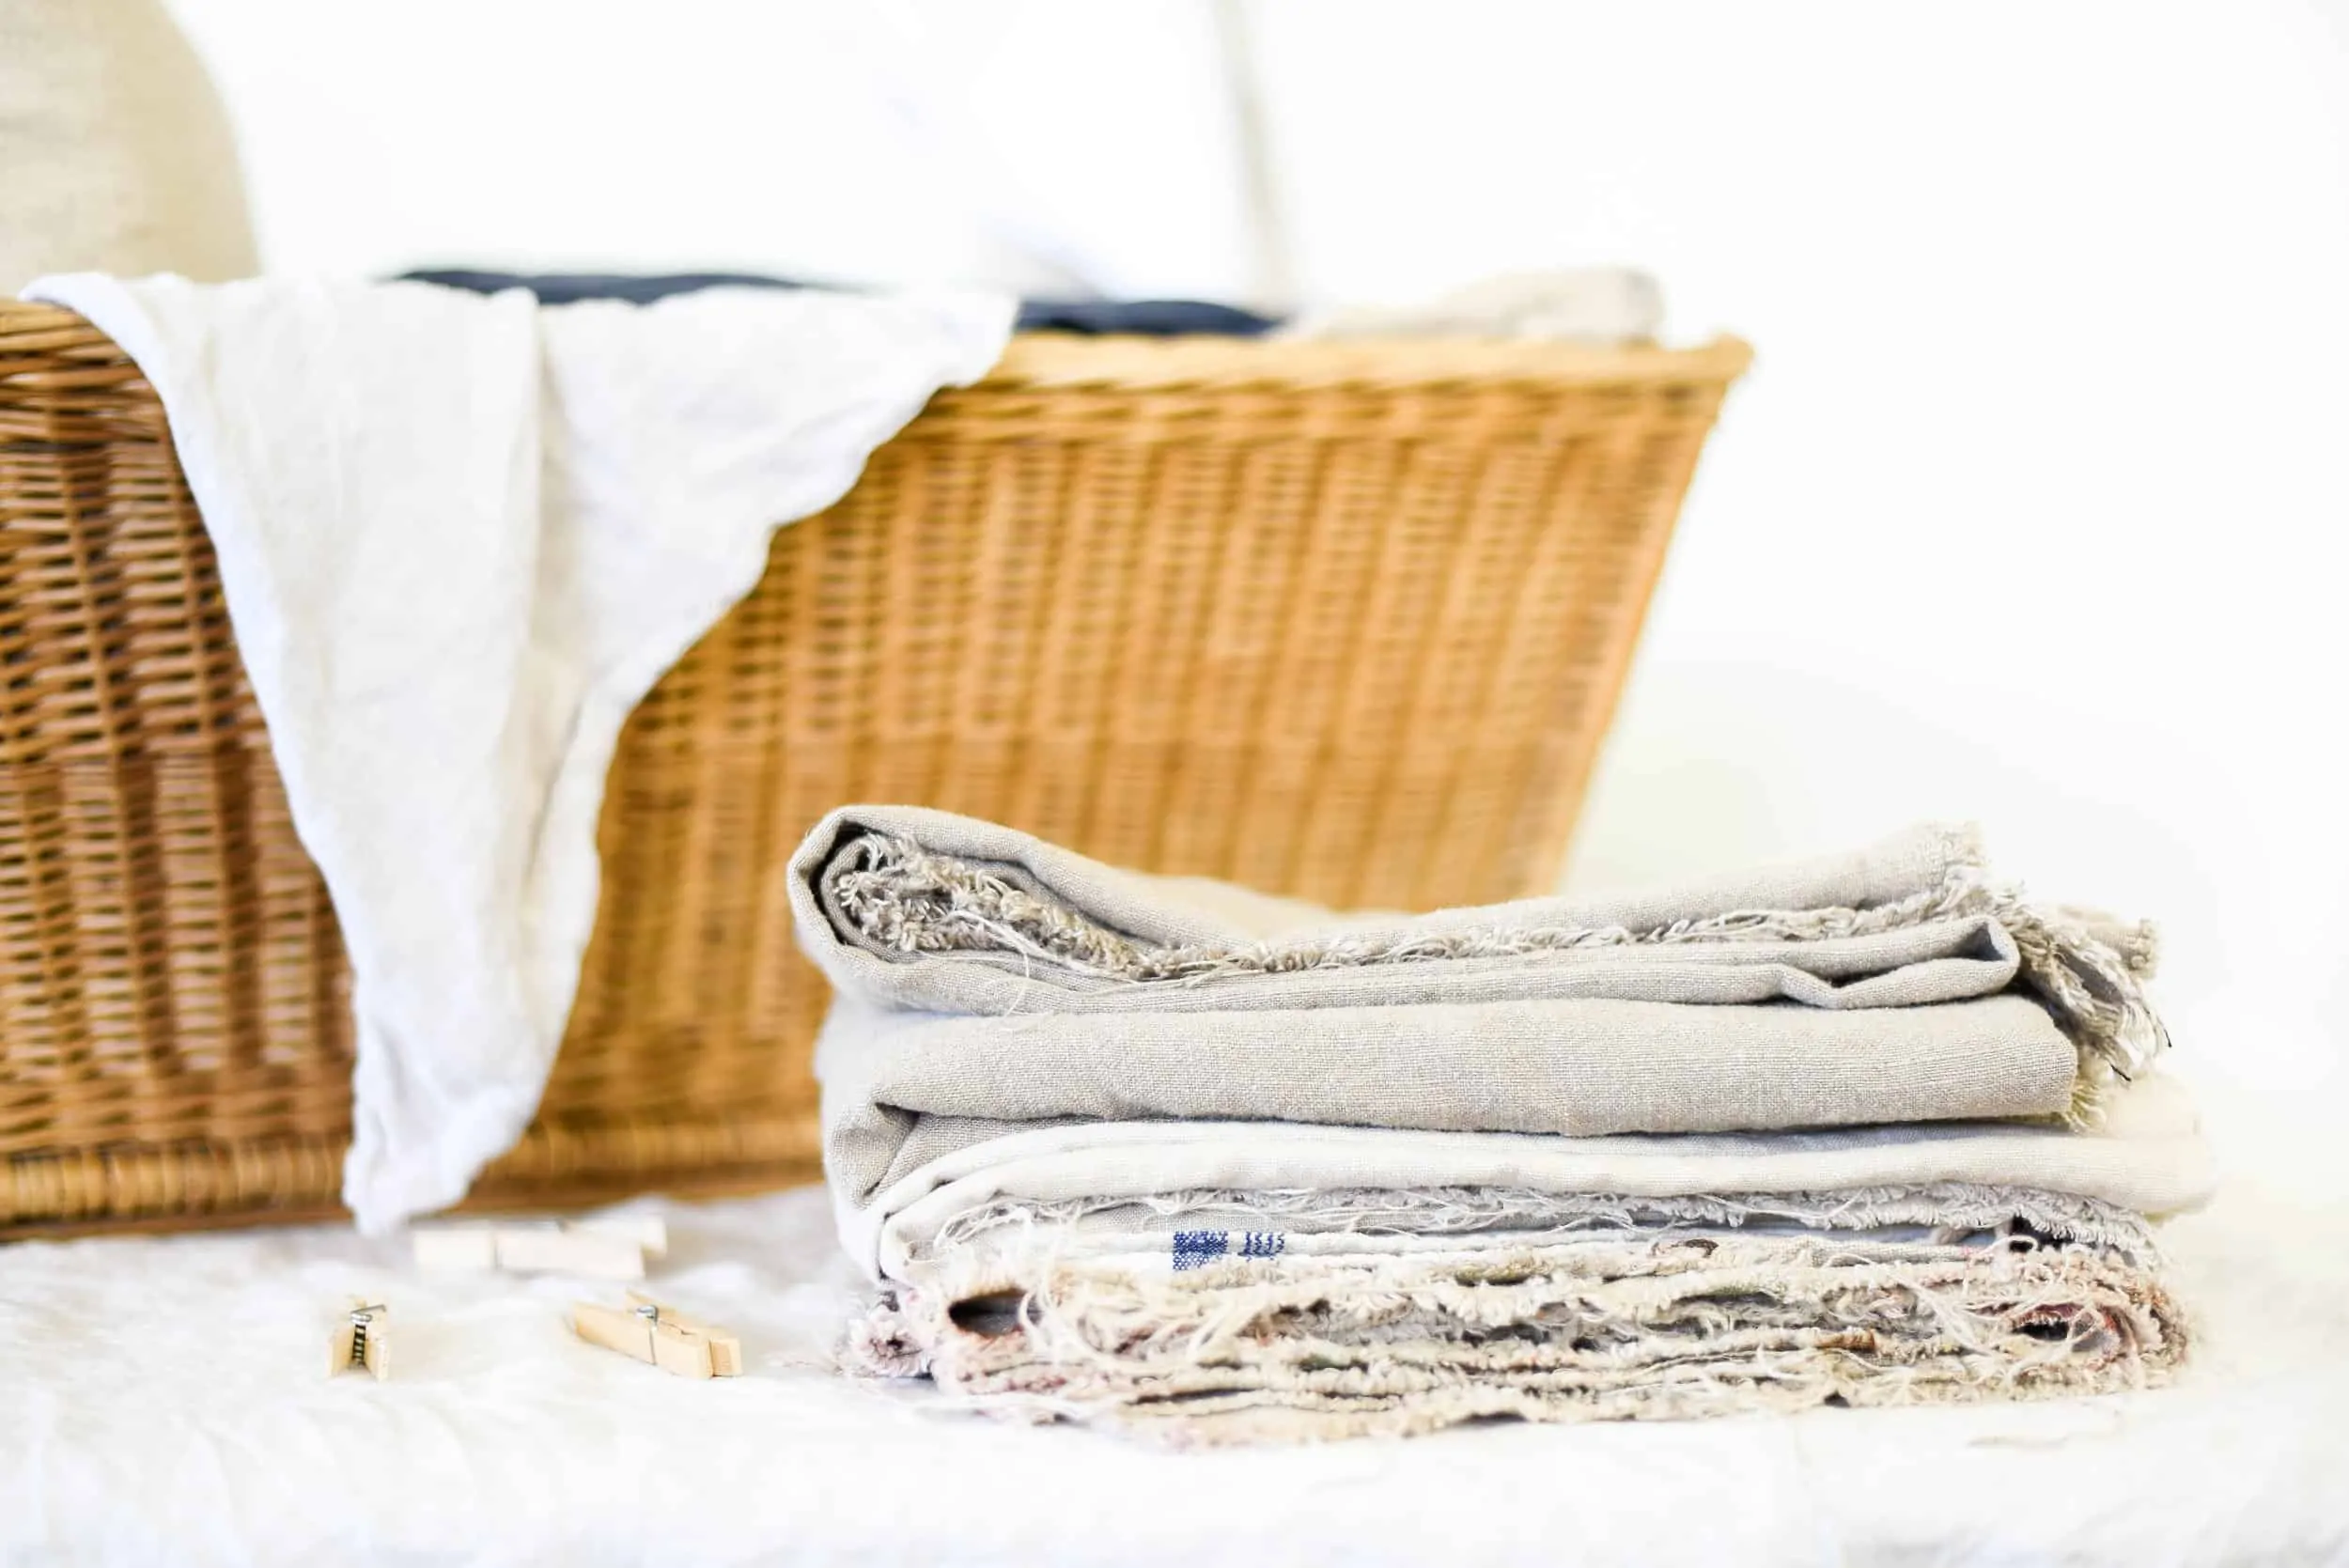 All About Weaving with Linen - GATHER Textiles Inc.